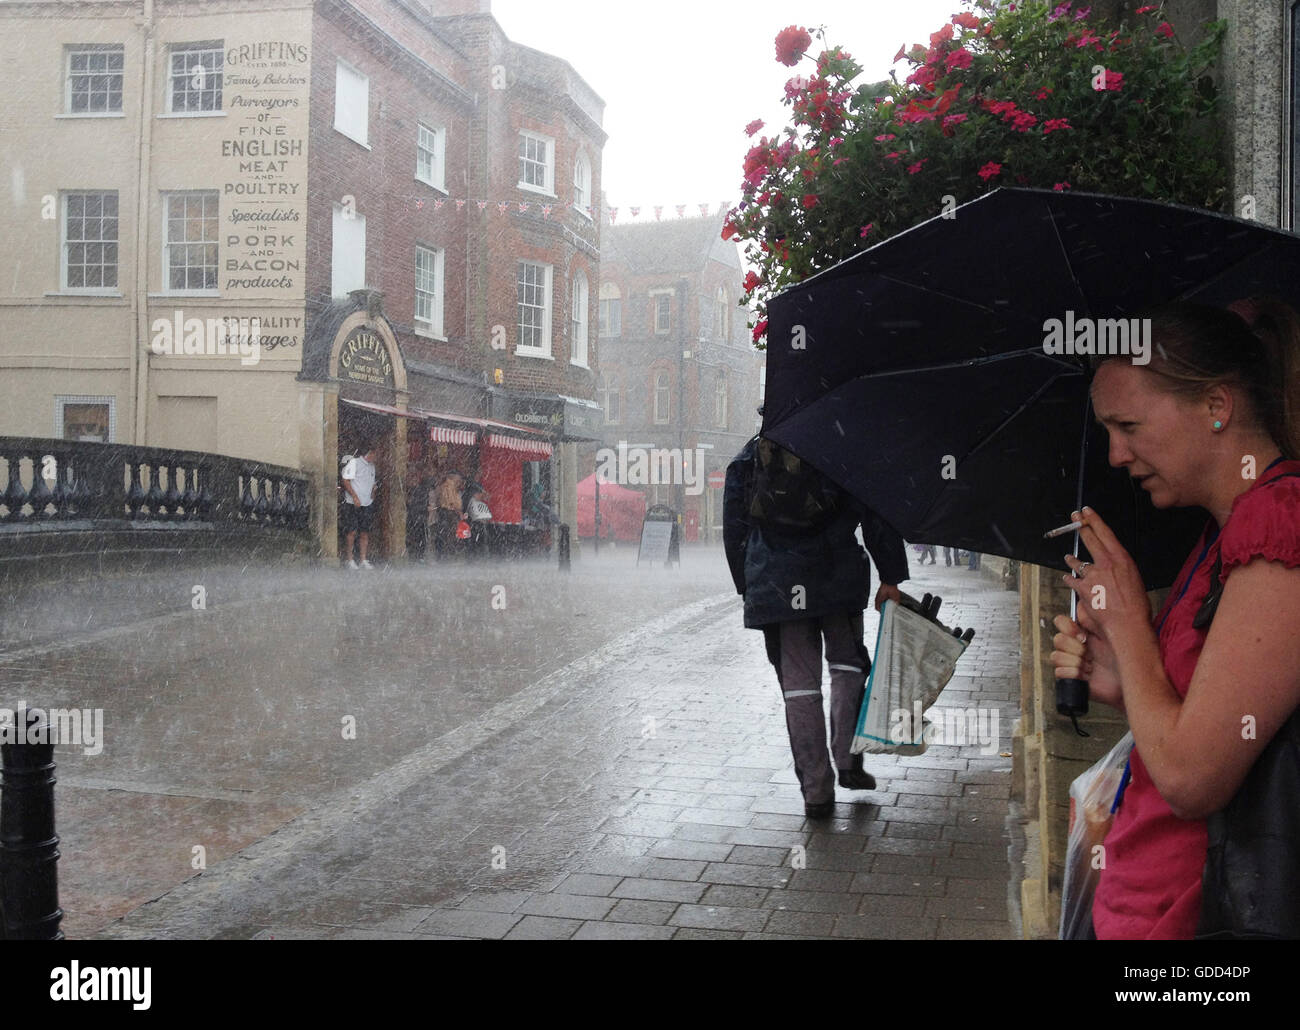 Shoppers sheltering from torrential rain in the town of Newbury, Berkshire, UK Stock Photo